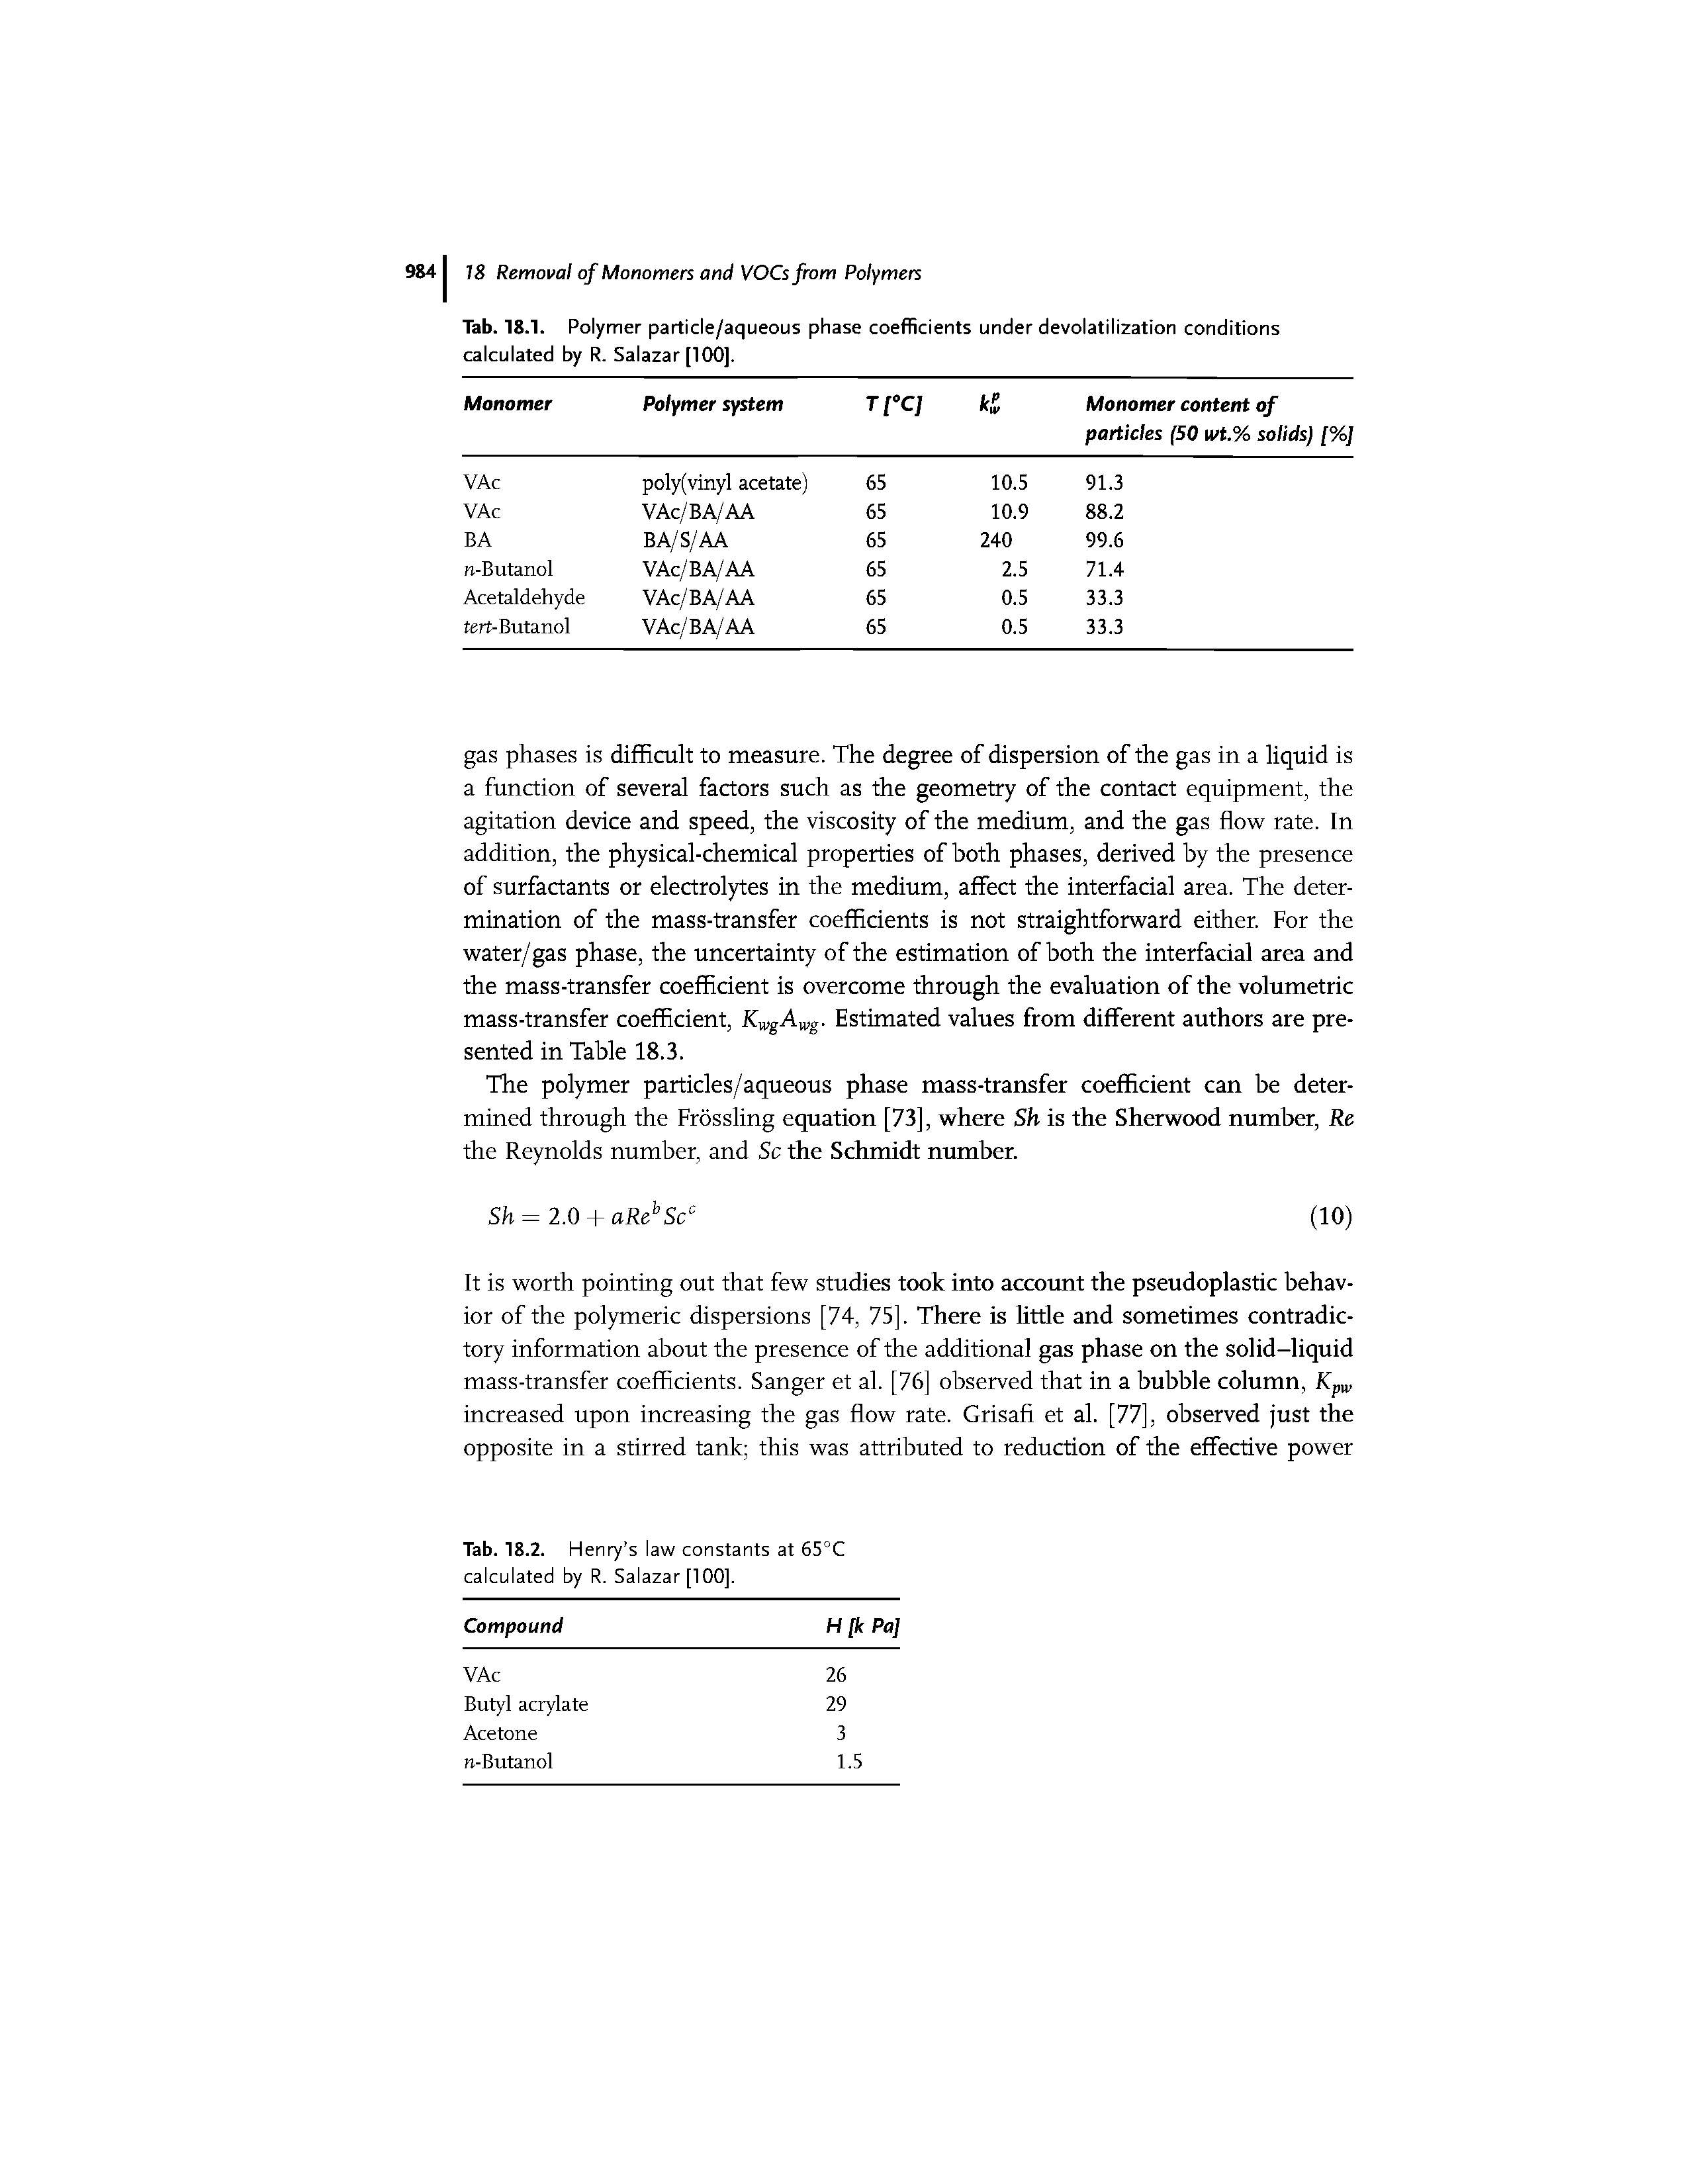 Tab. 18.1. Polymer particle/aqueous phase coefficients under devolatilization conditions calculated by R. Salazar [100].